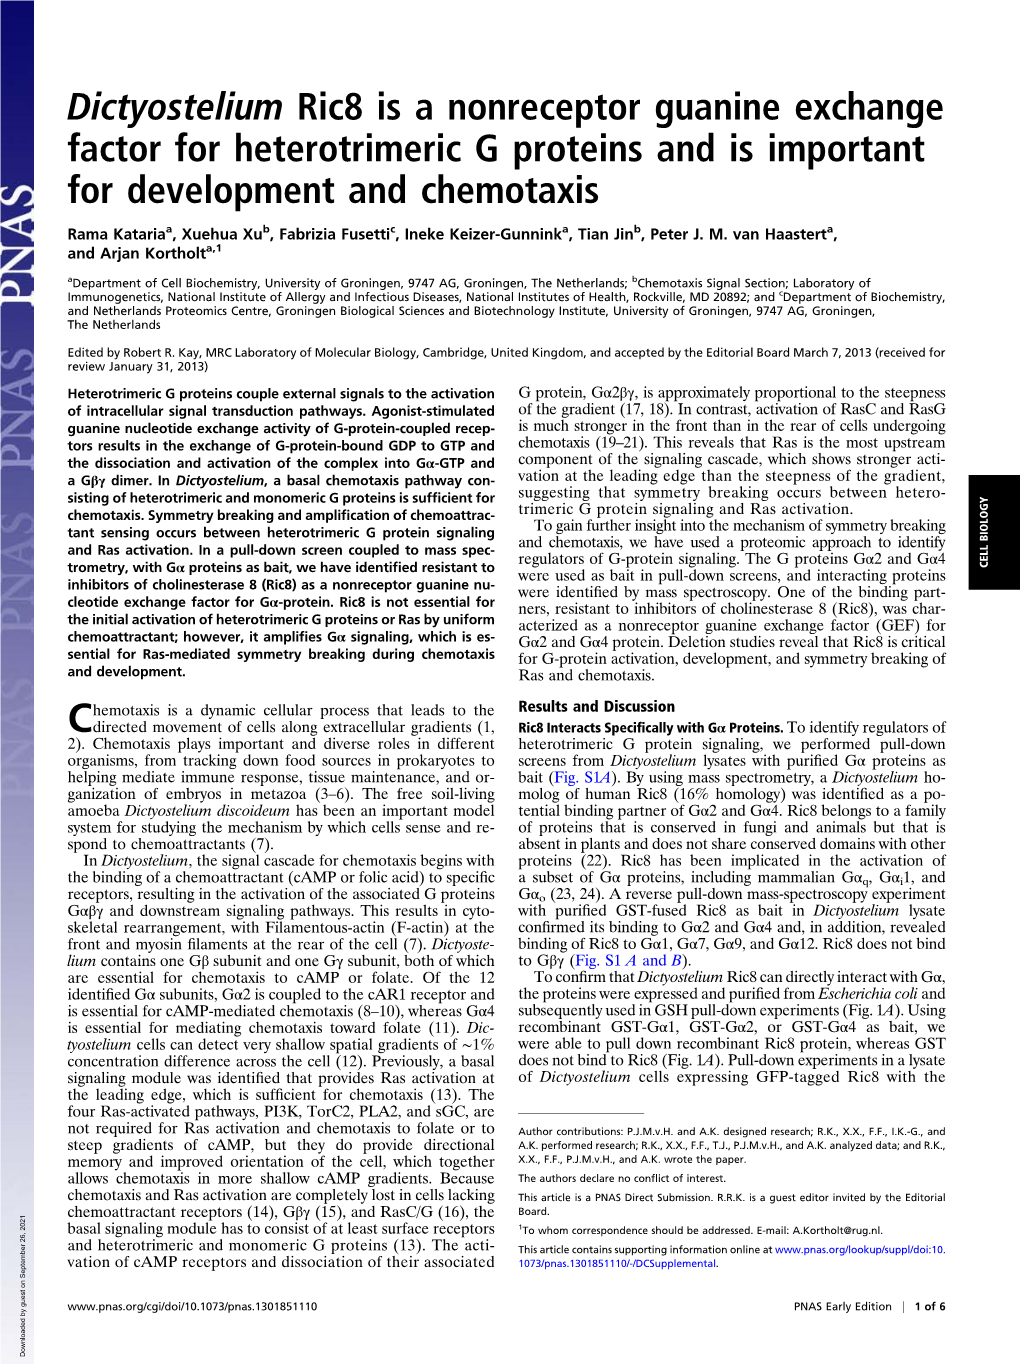 Dictyostelium Ric8 Is a Nonreceptor Guanine Exchange Factor for Heterotrimeric G Proteins and Is Important for Development and Chemotaxis